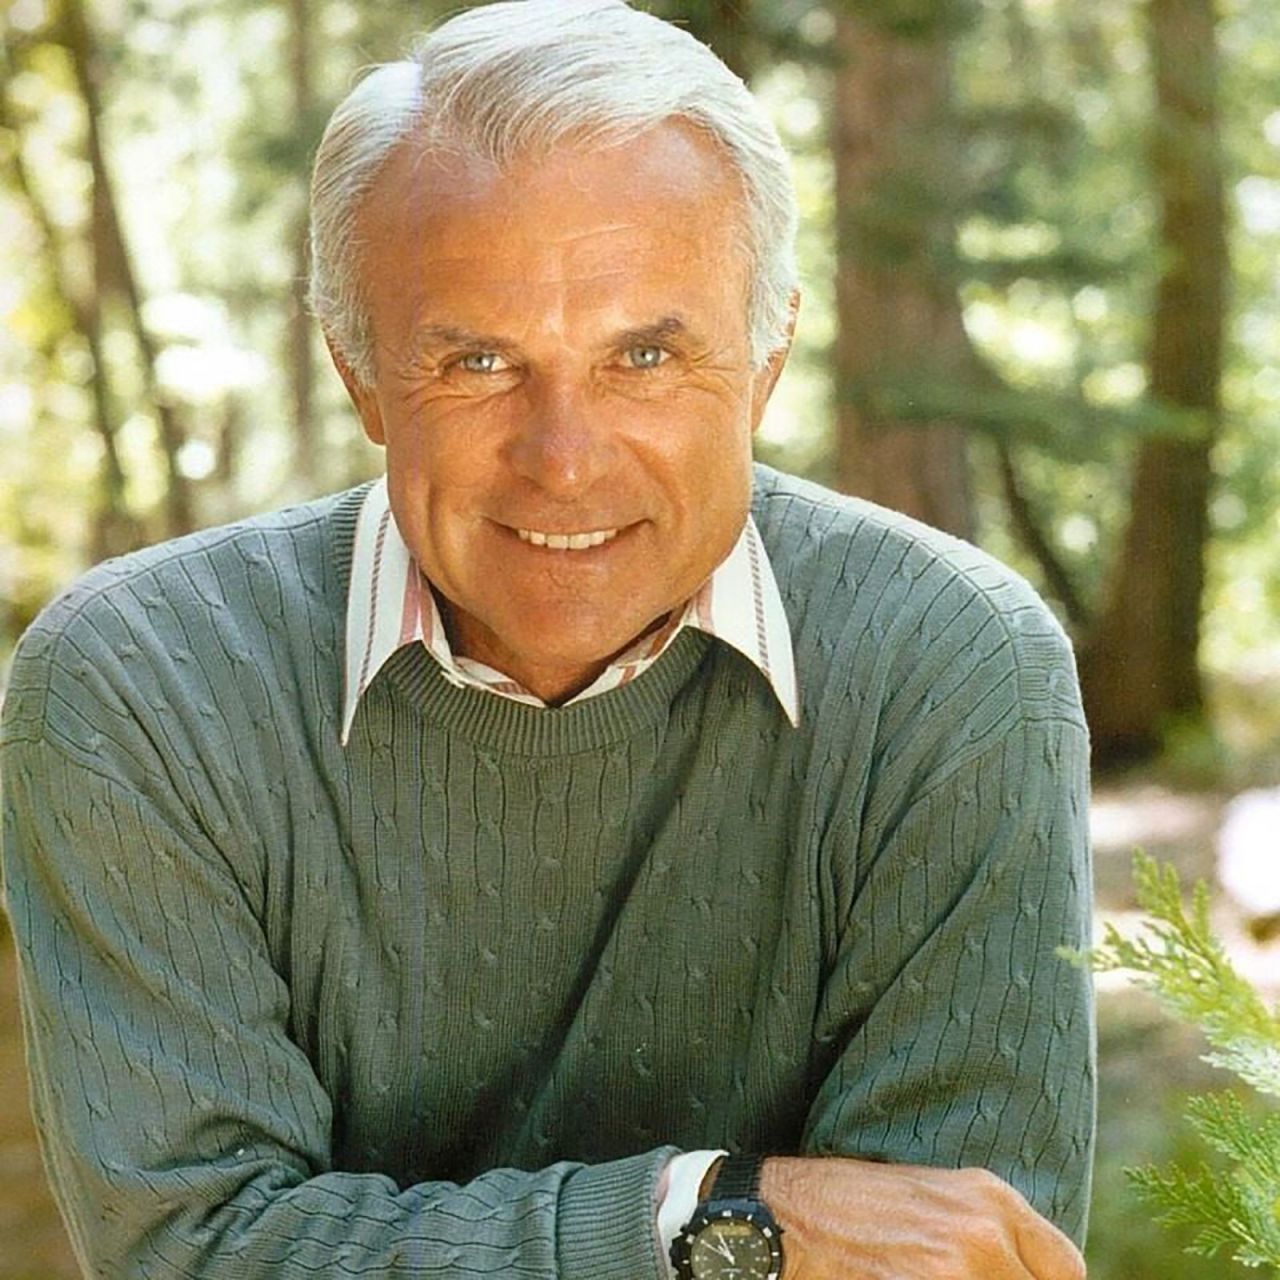 Actor <a href="http://www.cnn.com/2020/02/08/entertainment/robert-conrad-obit-trnd/index.html" target="_blank">Robert Conrad</a>, known for the television show "The Wild Wild West," died February 8 at the age of 84, according to family spokesman Jeff Ballard.